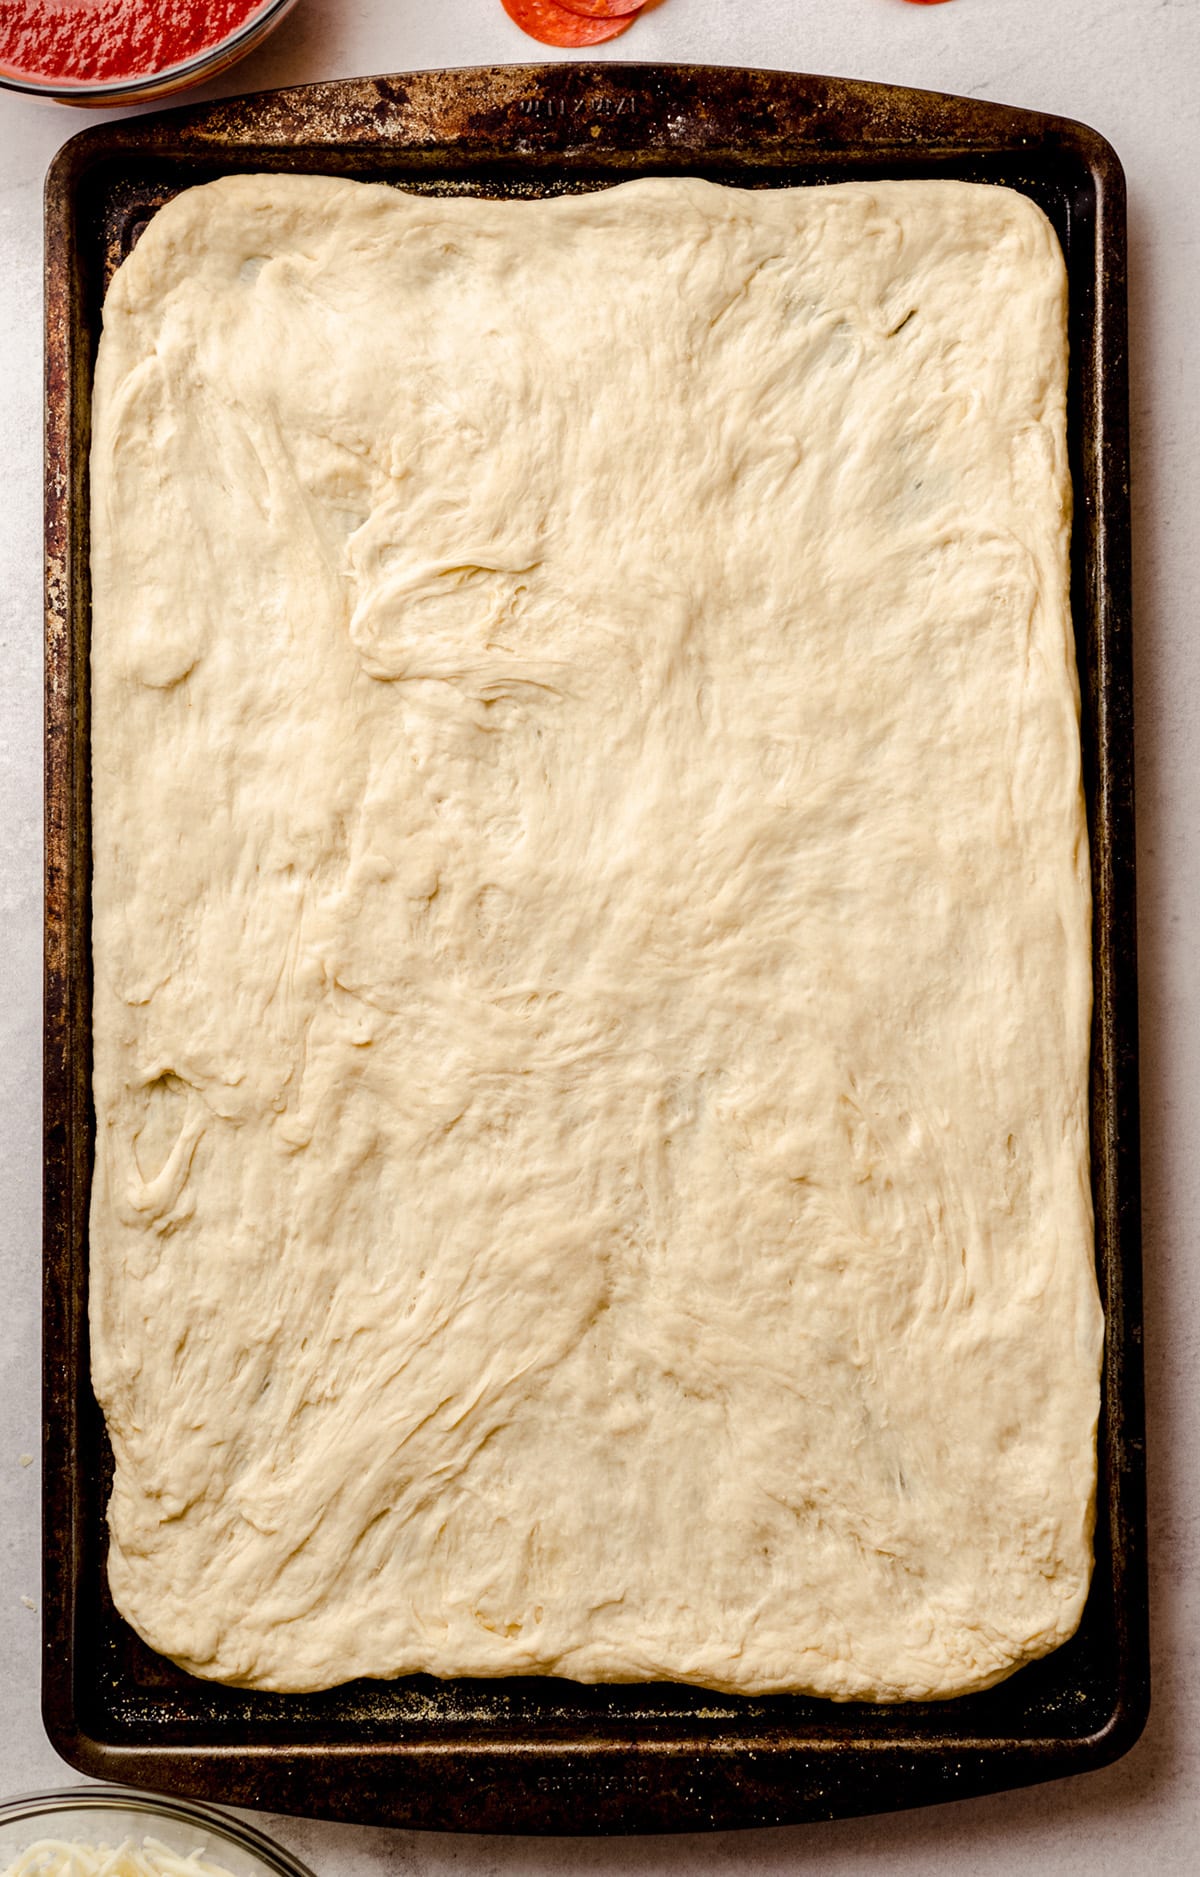 A sheet pan fitted with homemade pizza dough.